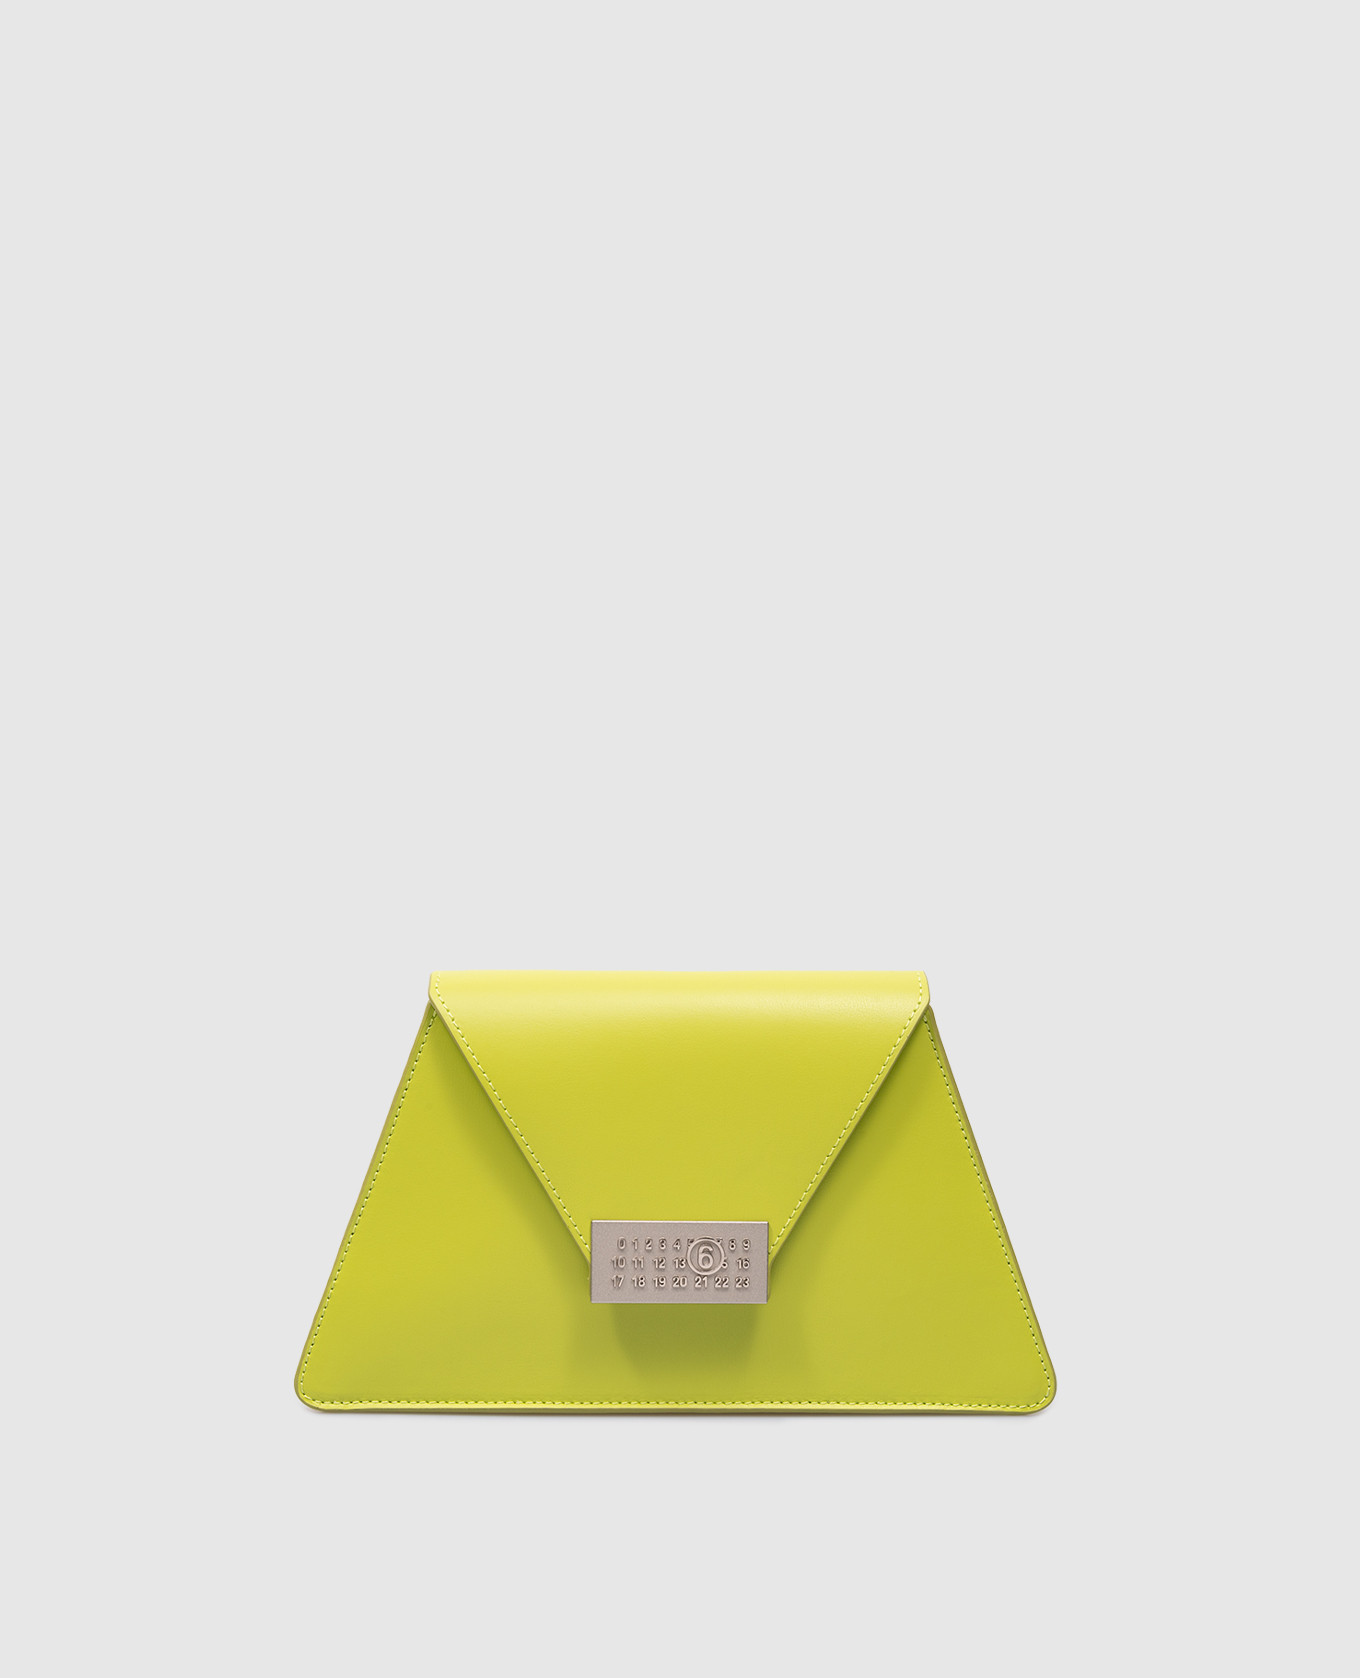 Numeric green leather bag in origami style